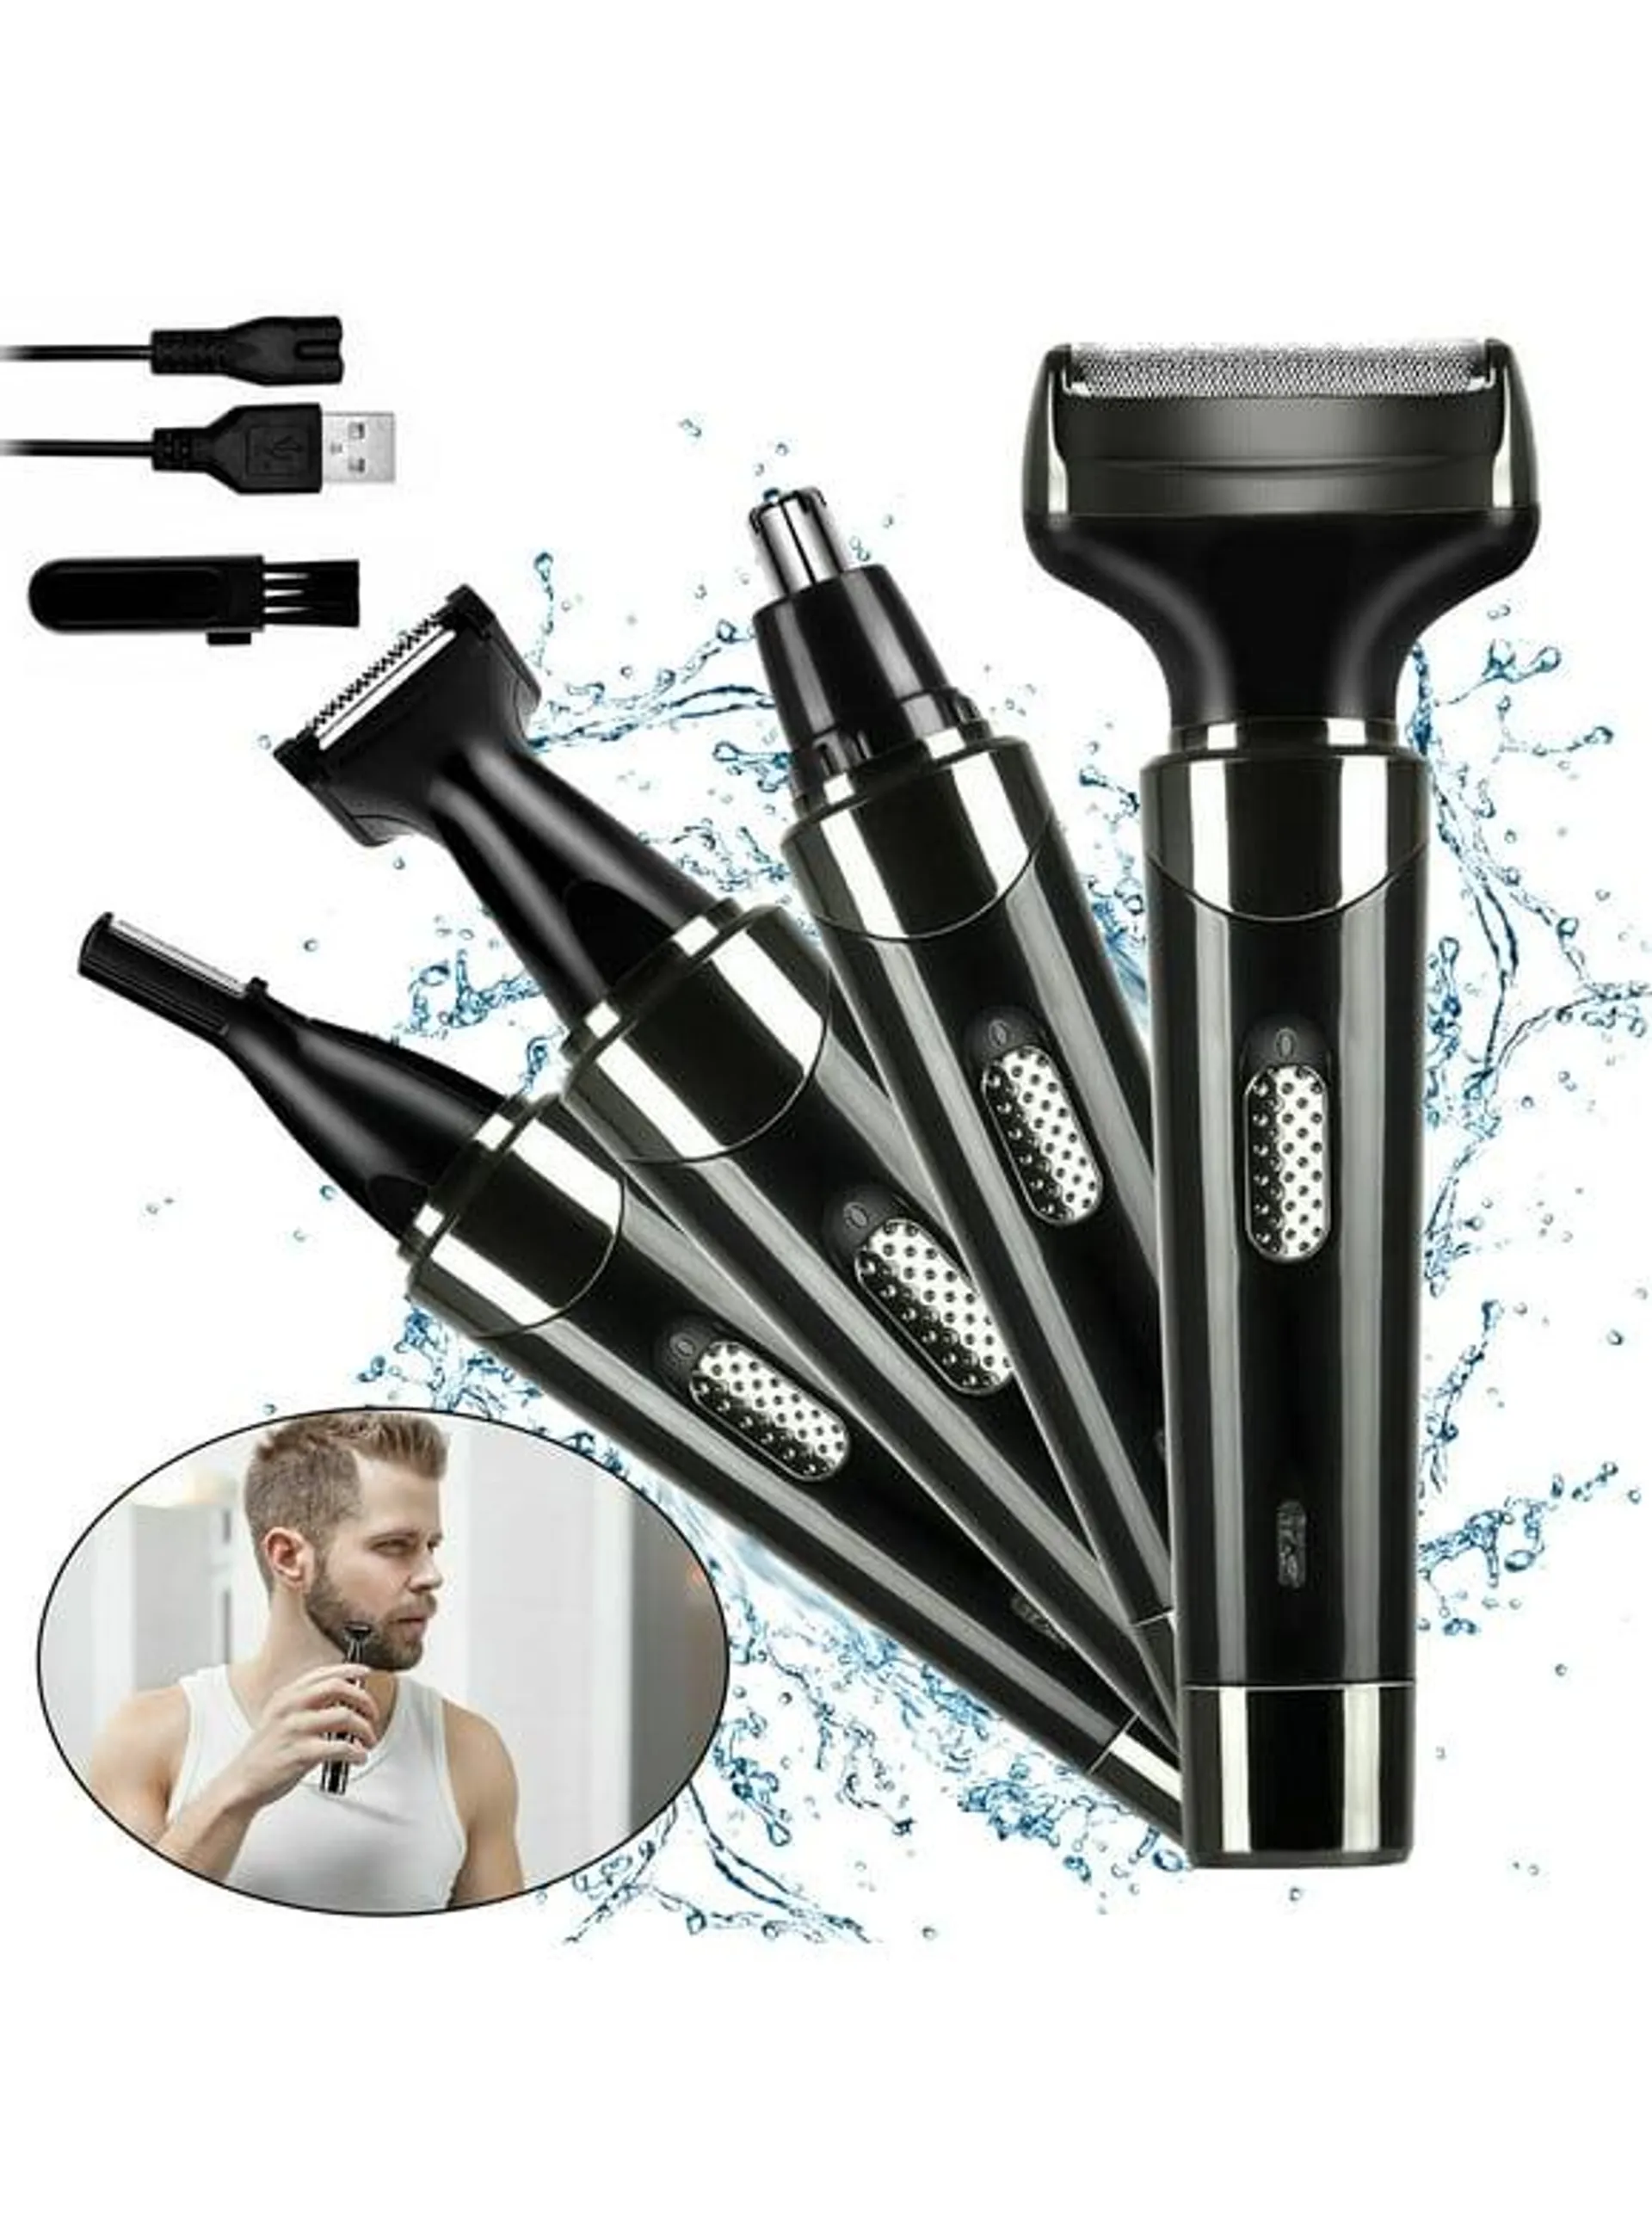 Electric Razor for Men, 4 in 1 Electric Shaver Painless, Wet & Dry, Waterproof Rechargeable, Black